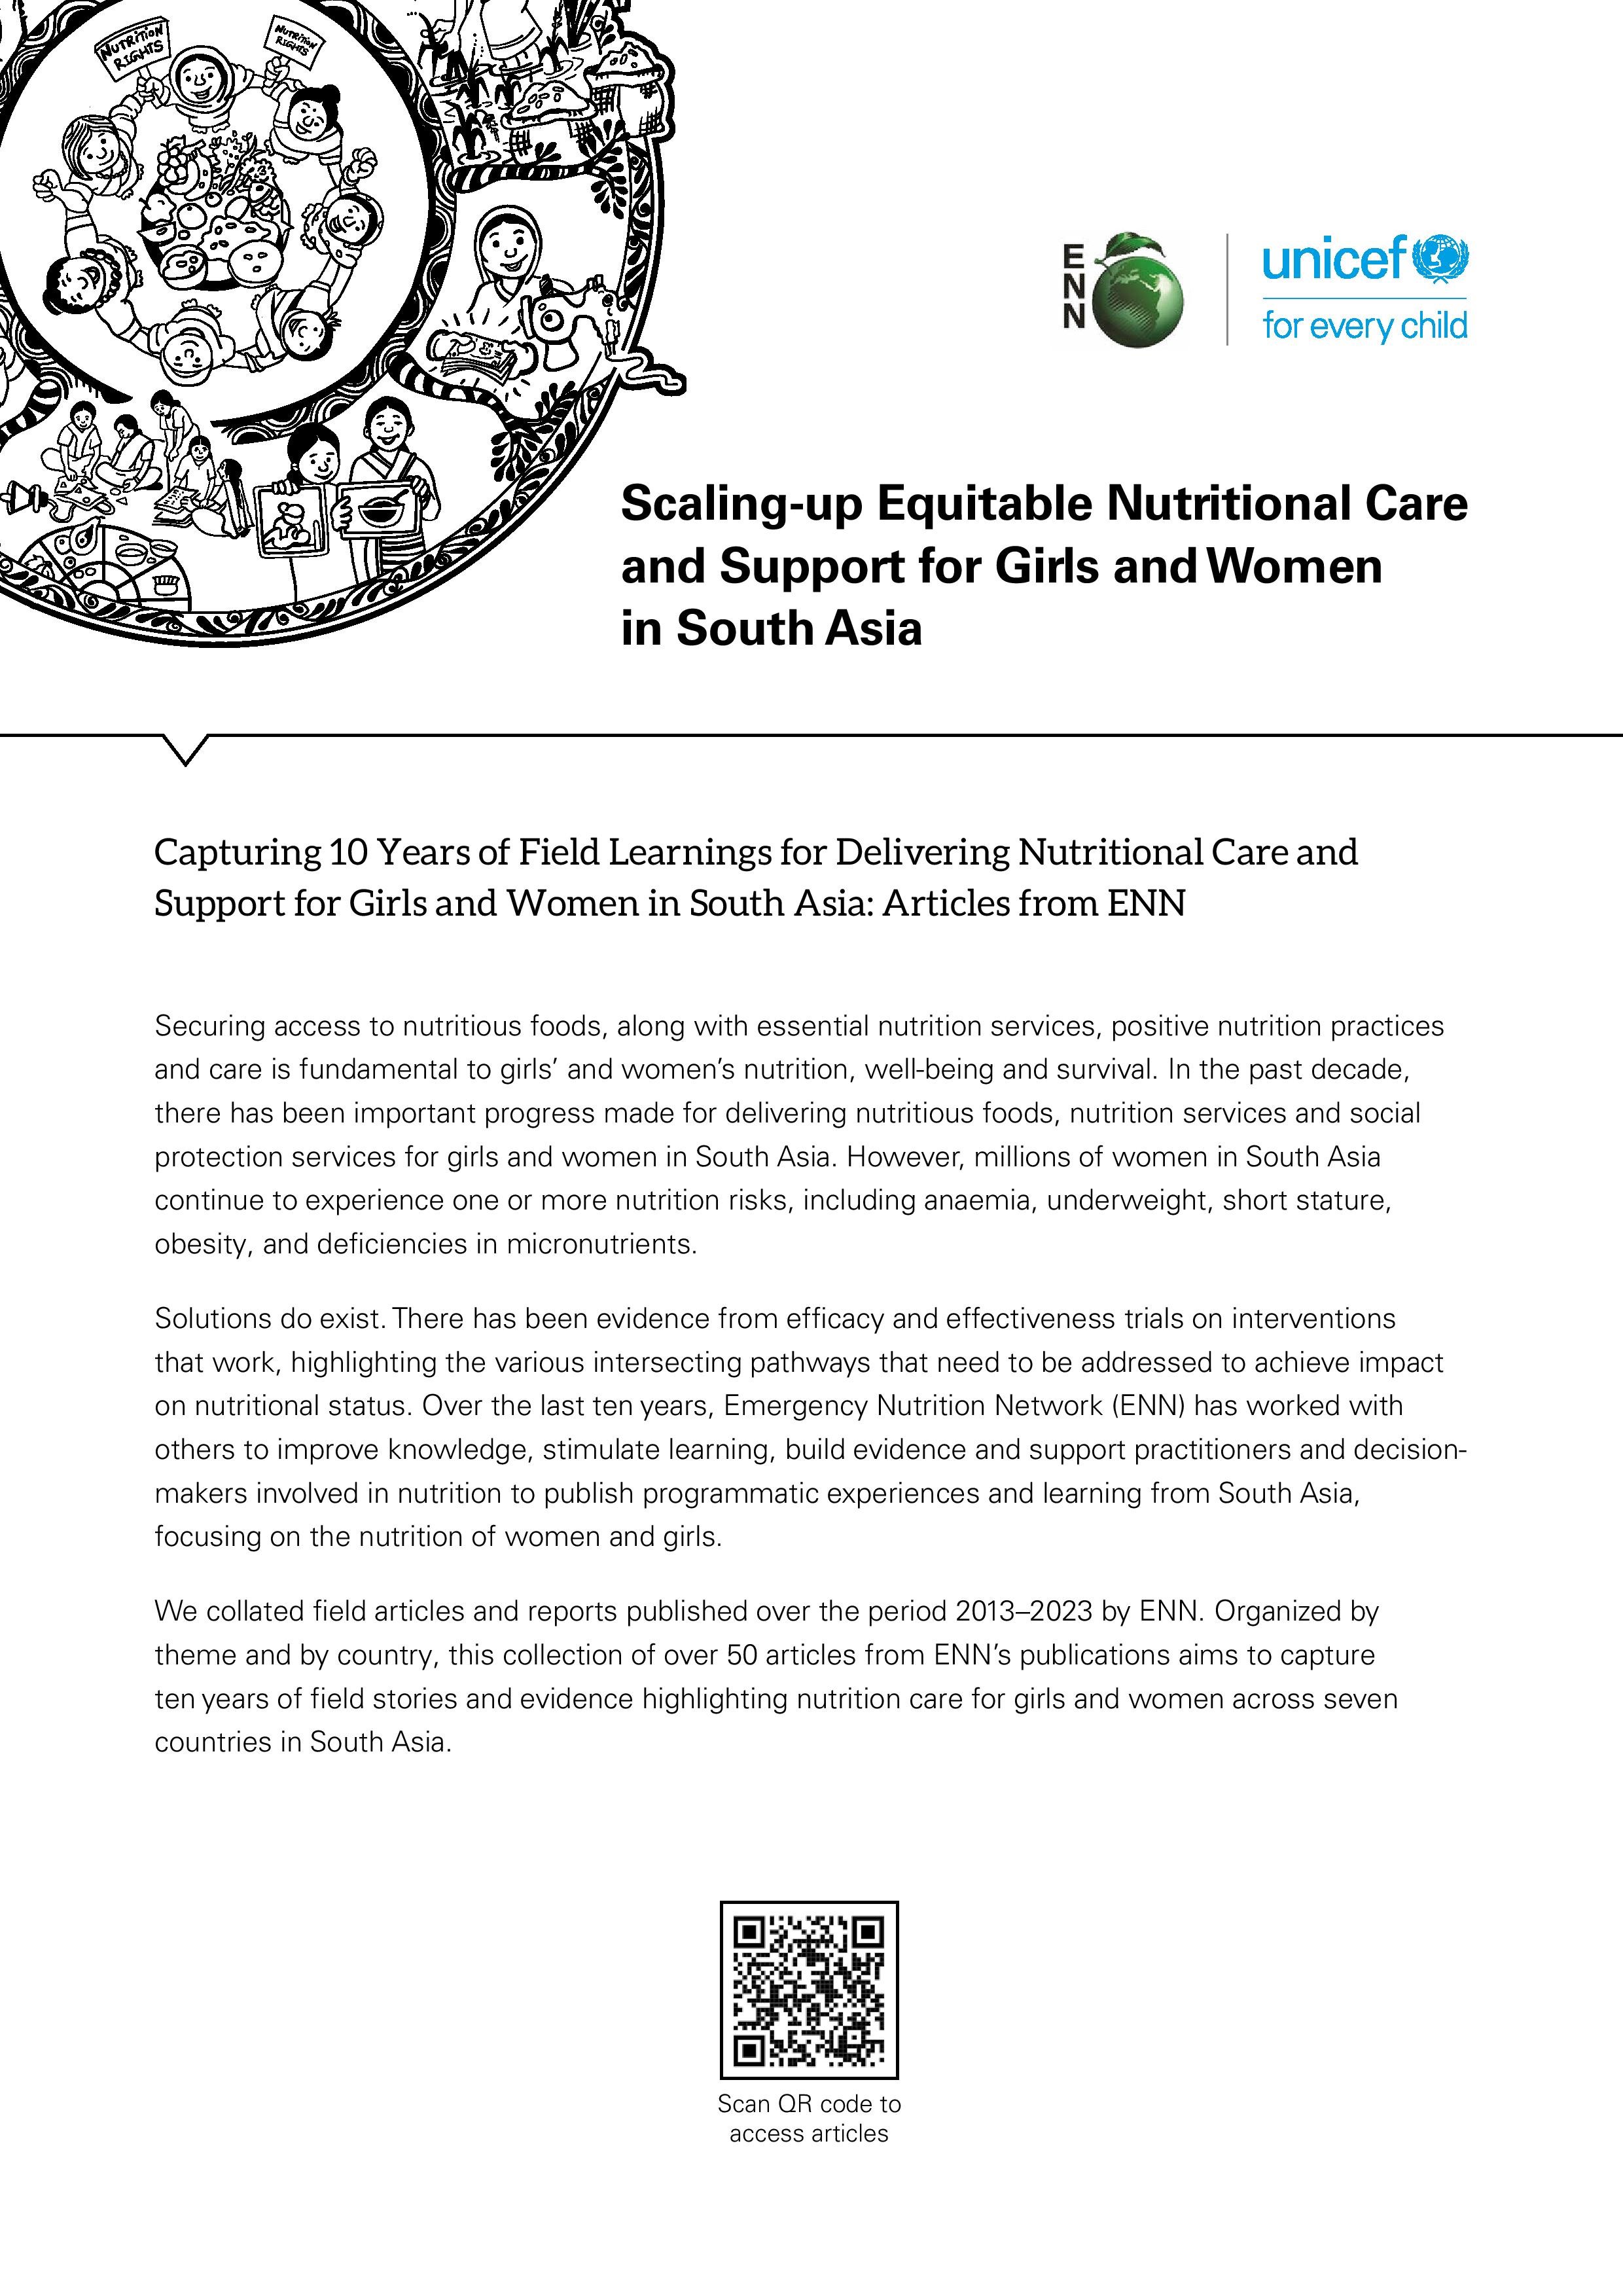 Scaling-up Equitable Nutritional Care and Support for Girls and Women in South Asia document